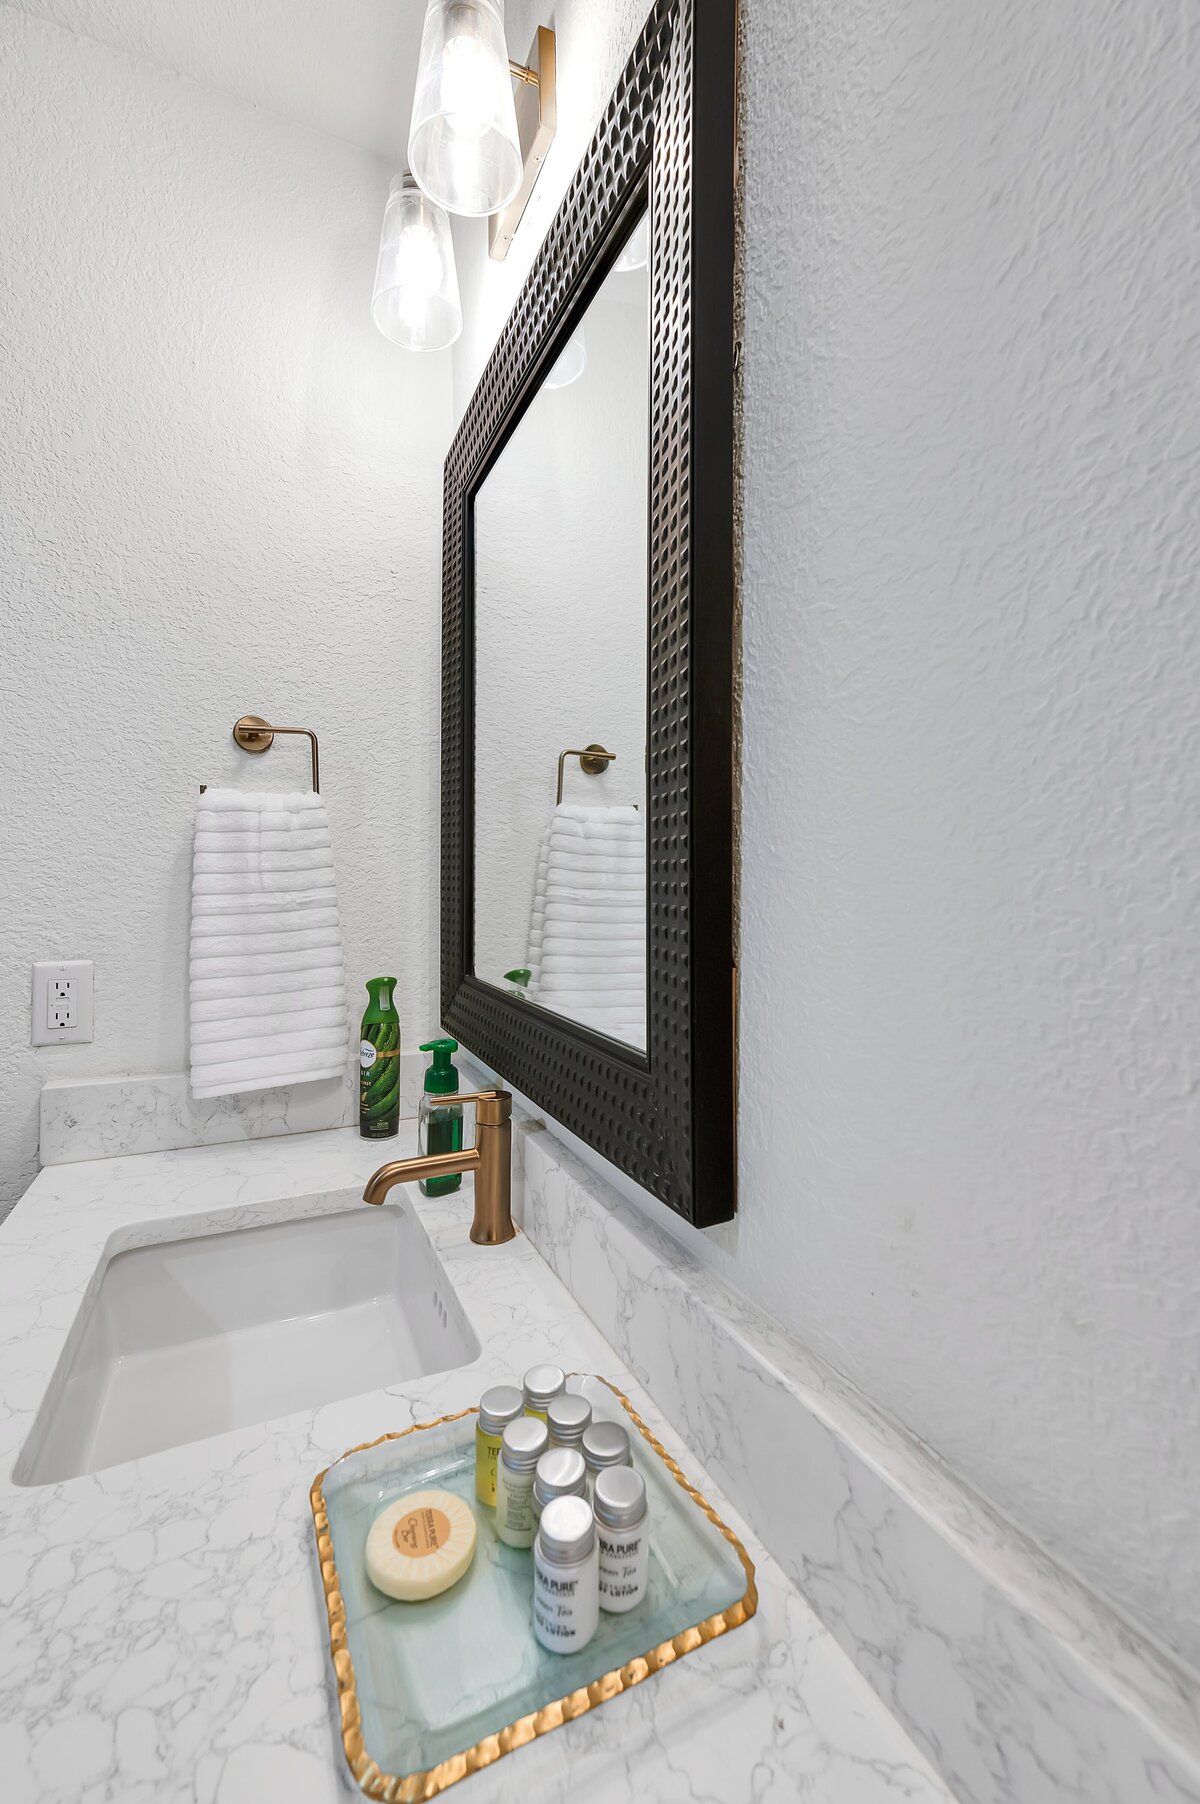 Bathroom vanity in this two-bedroom, two-bathroom vacation rental condo in the historic Behrens building in the heart of the Magnolia Silo District in downtown Waco, TX.